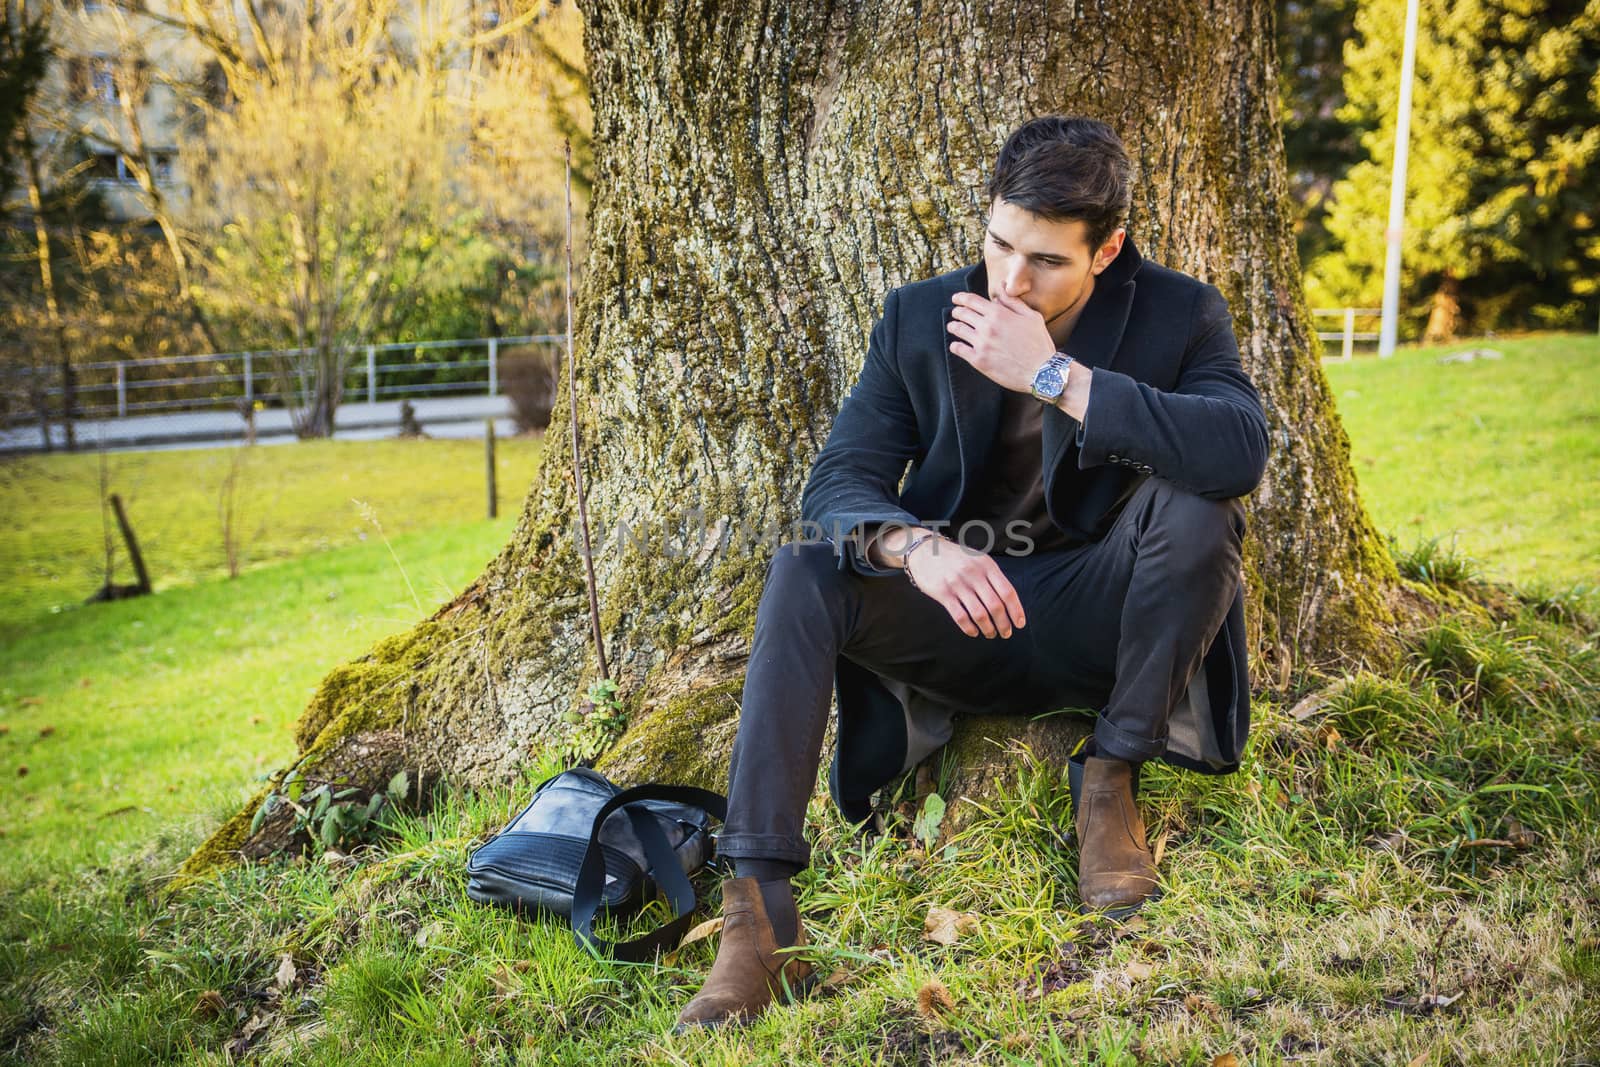 Handsome young man leaning against tree, looking to a side, in a sunny day wearing a black coat